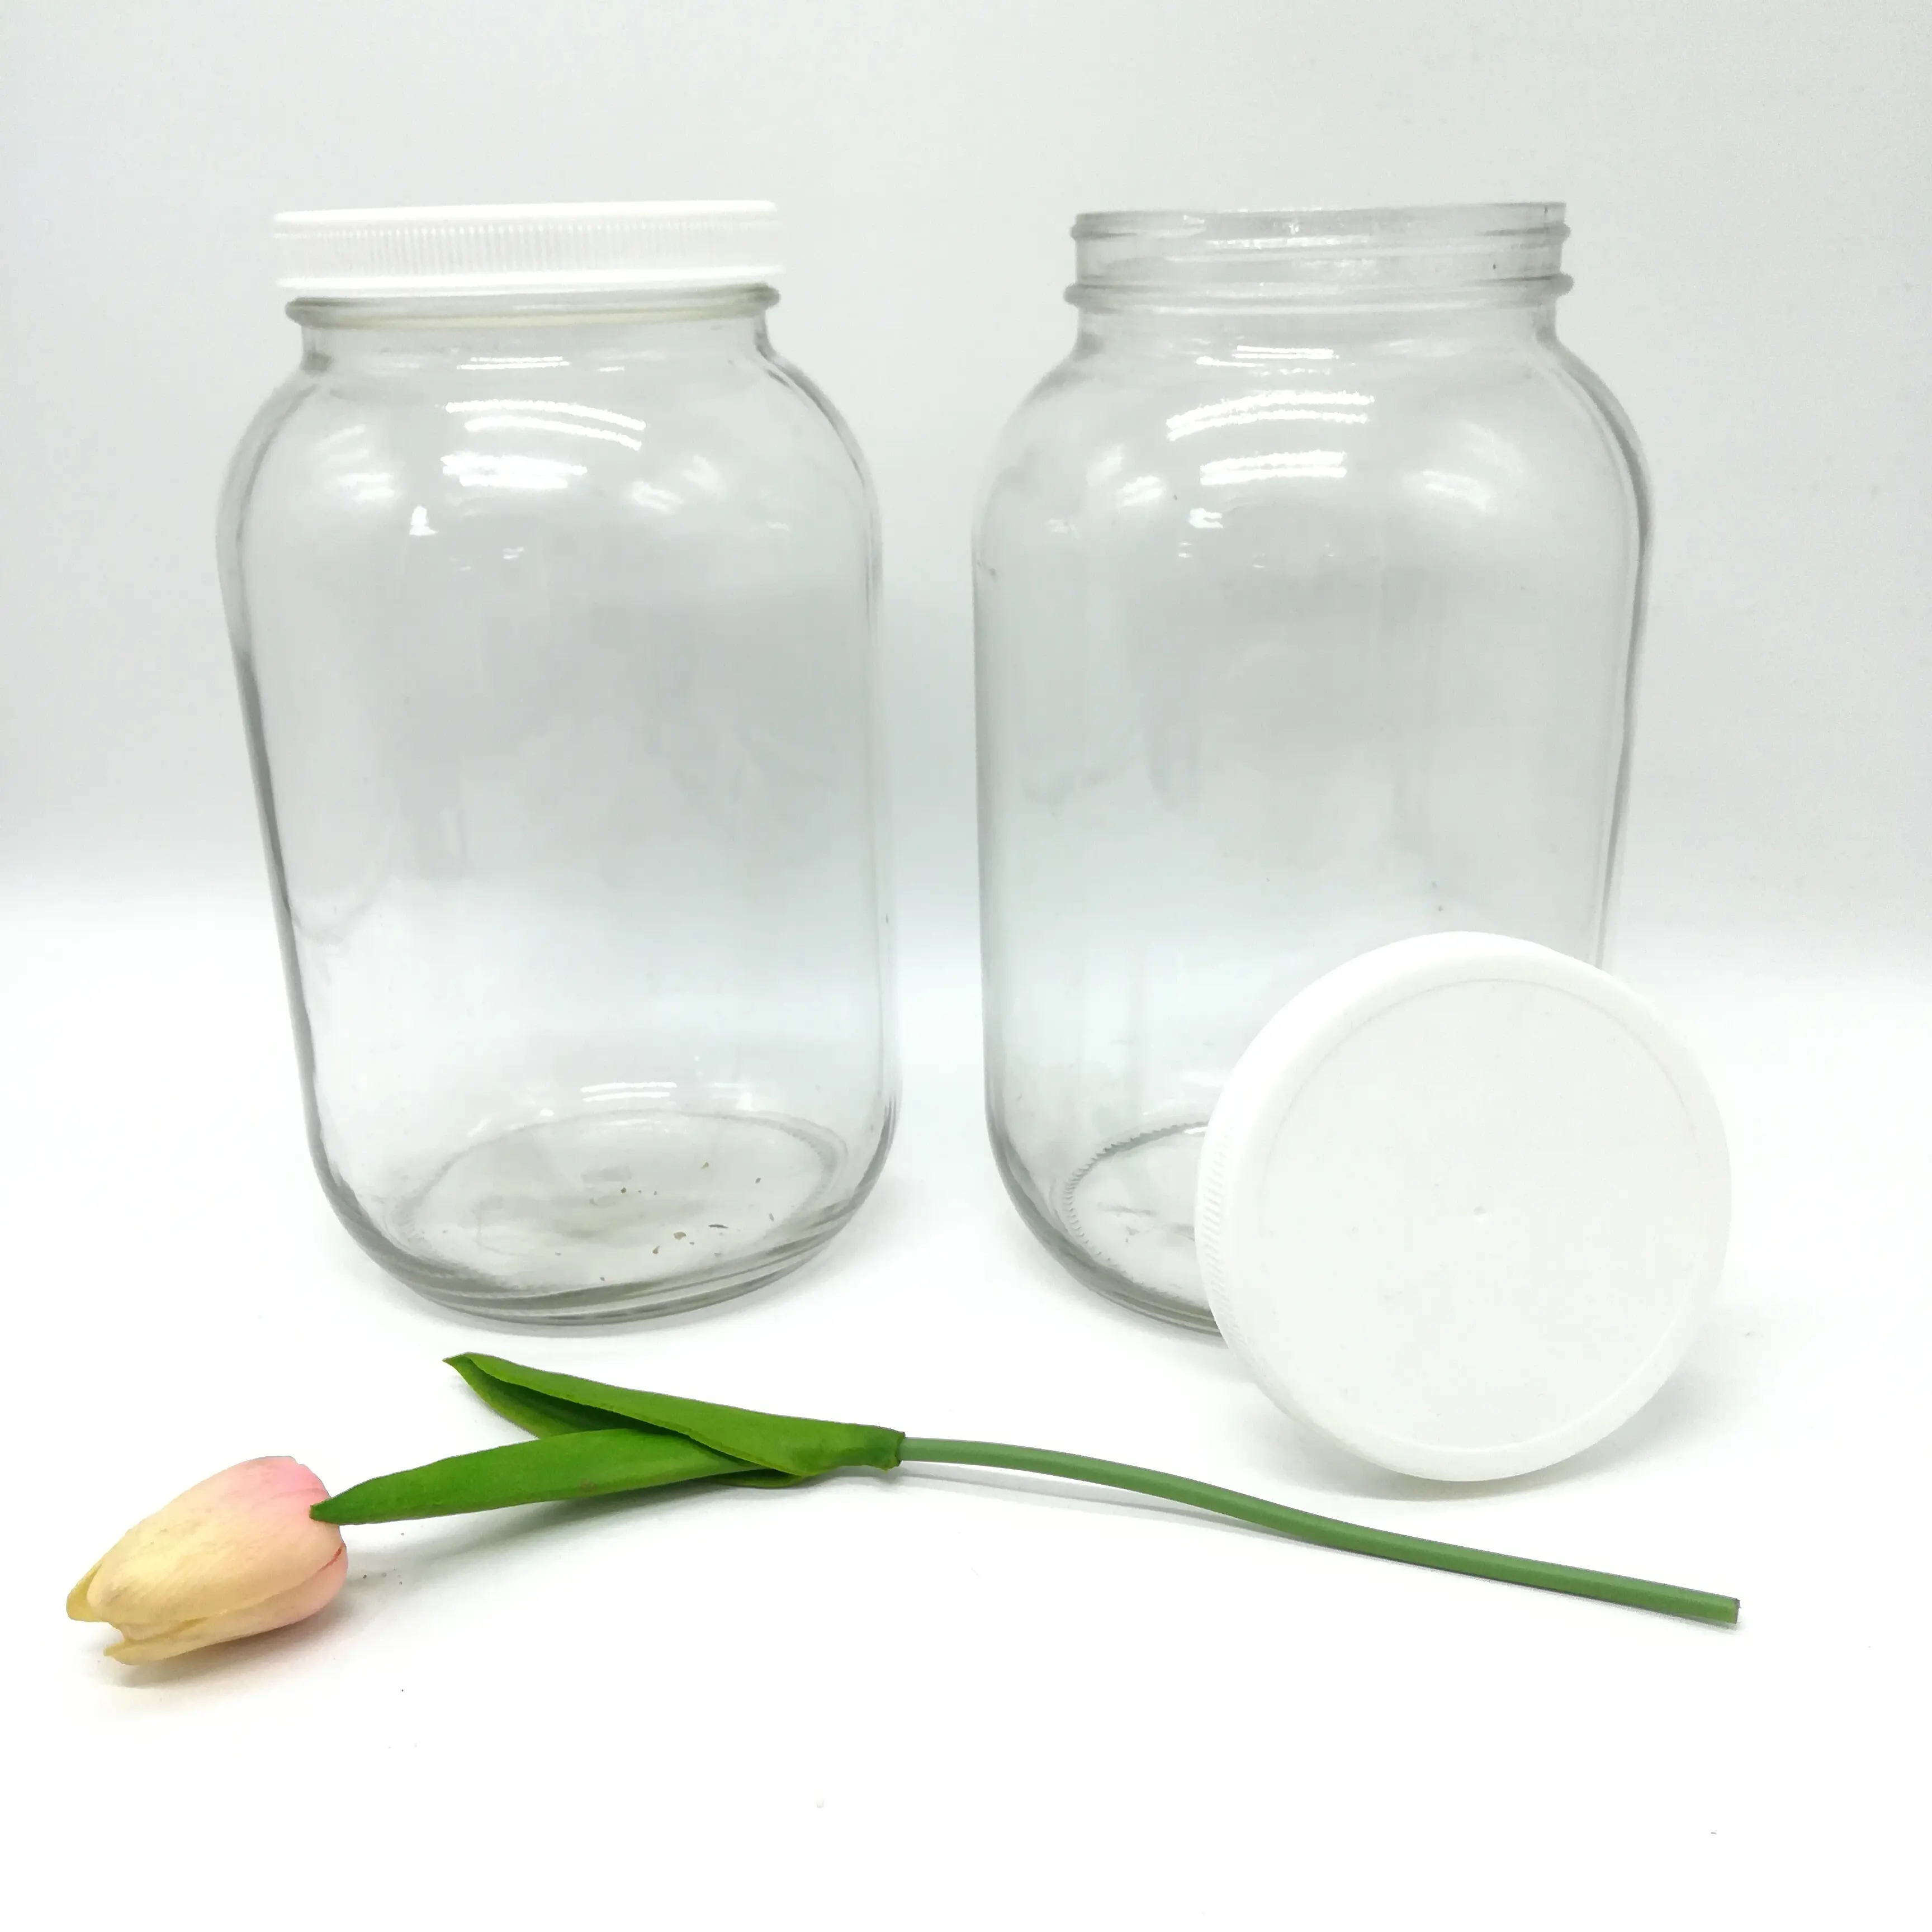 4L glass bottle round wide mouth 1 gallon glass jar with lid of mason jar manufacturer